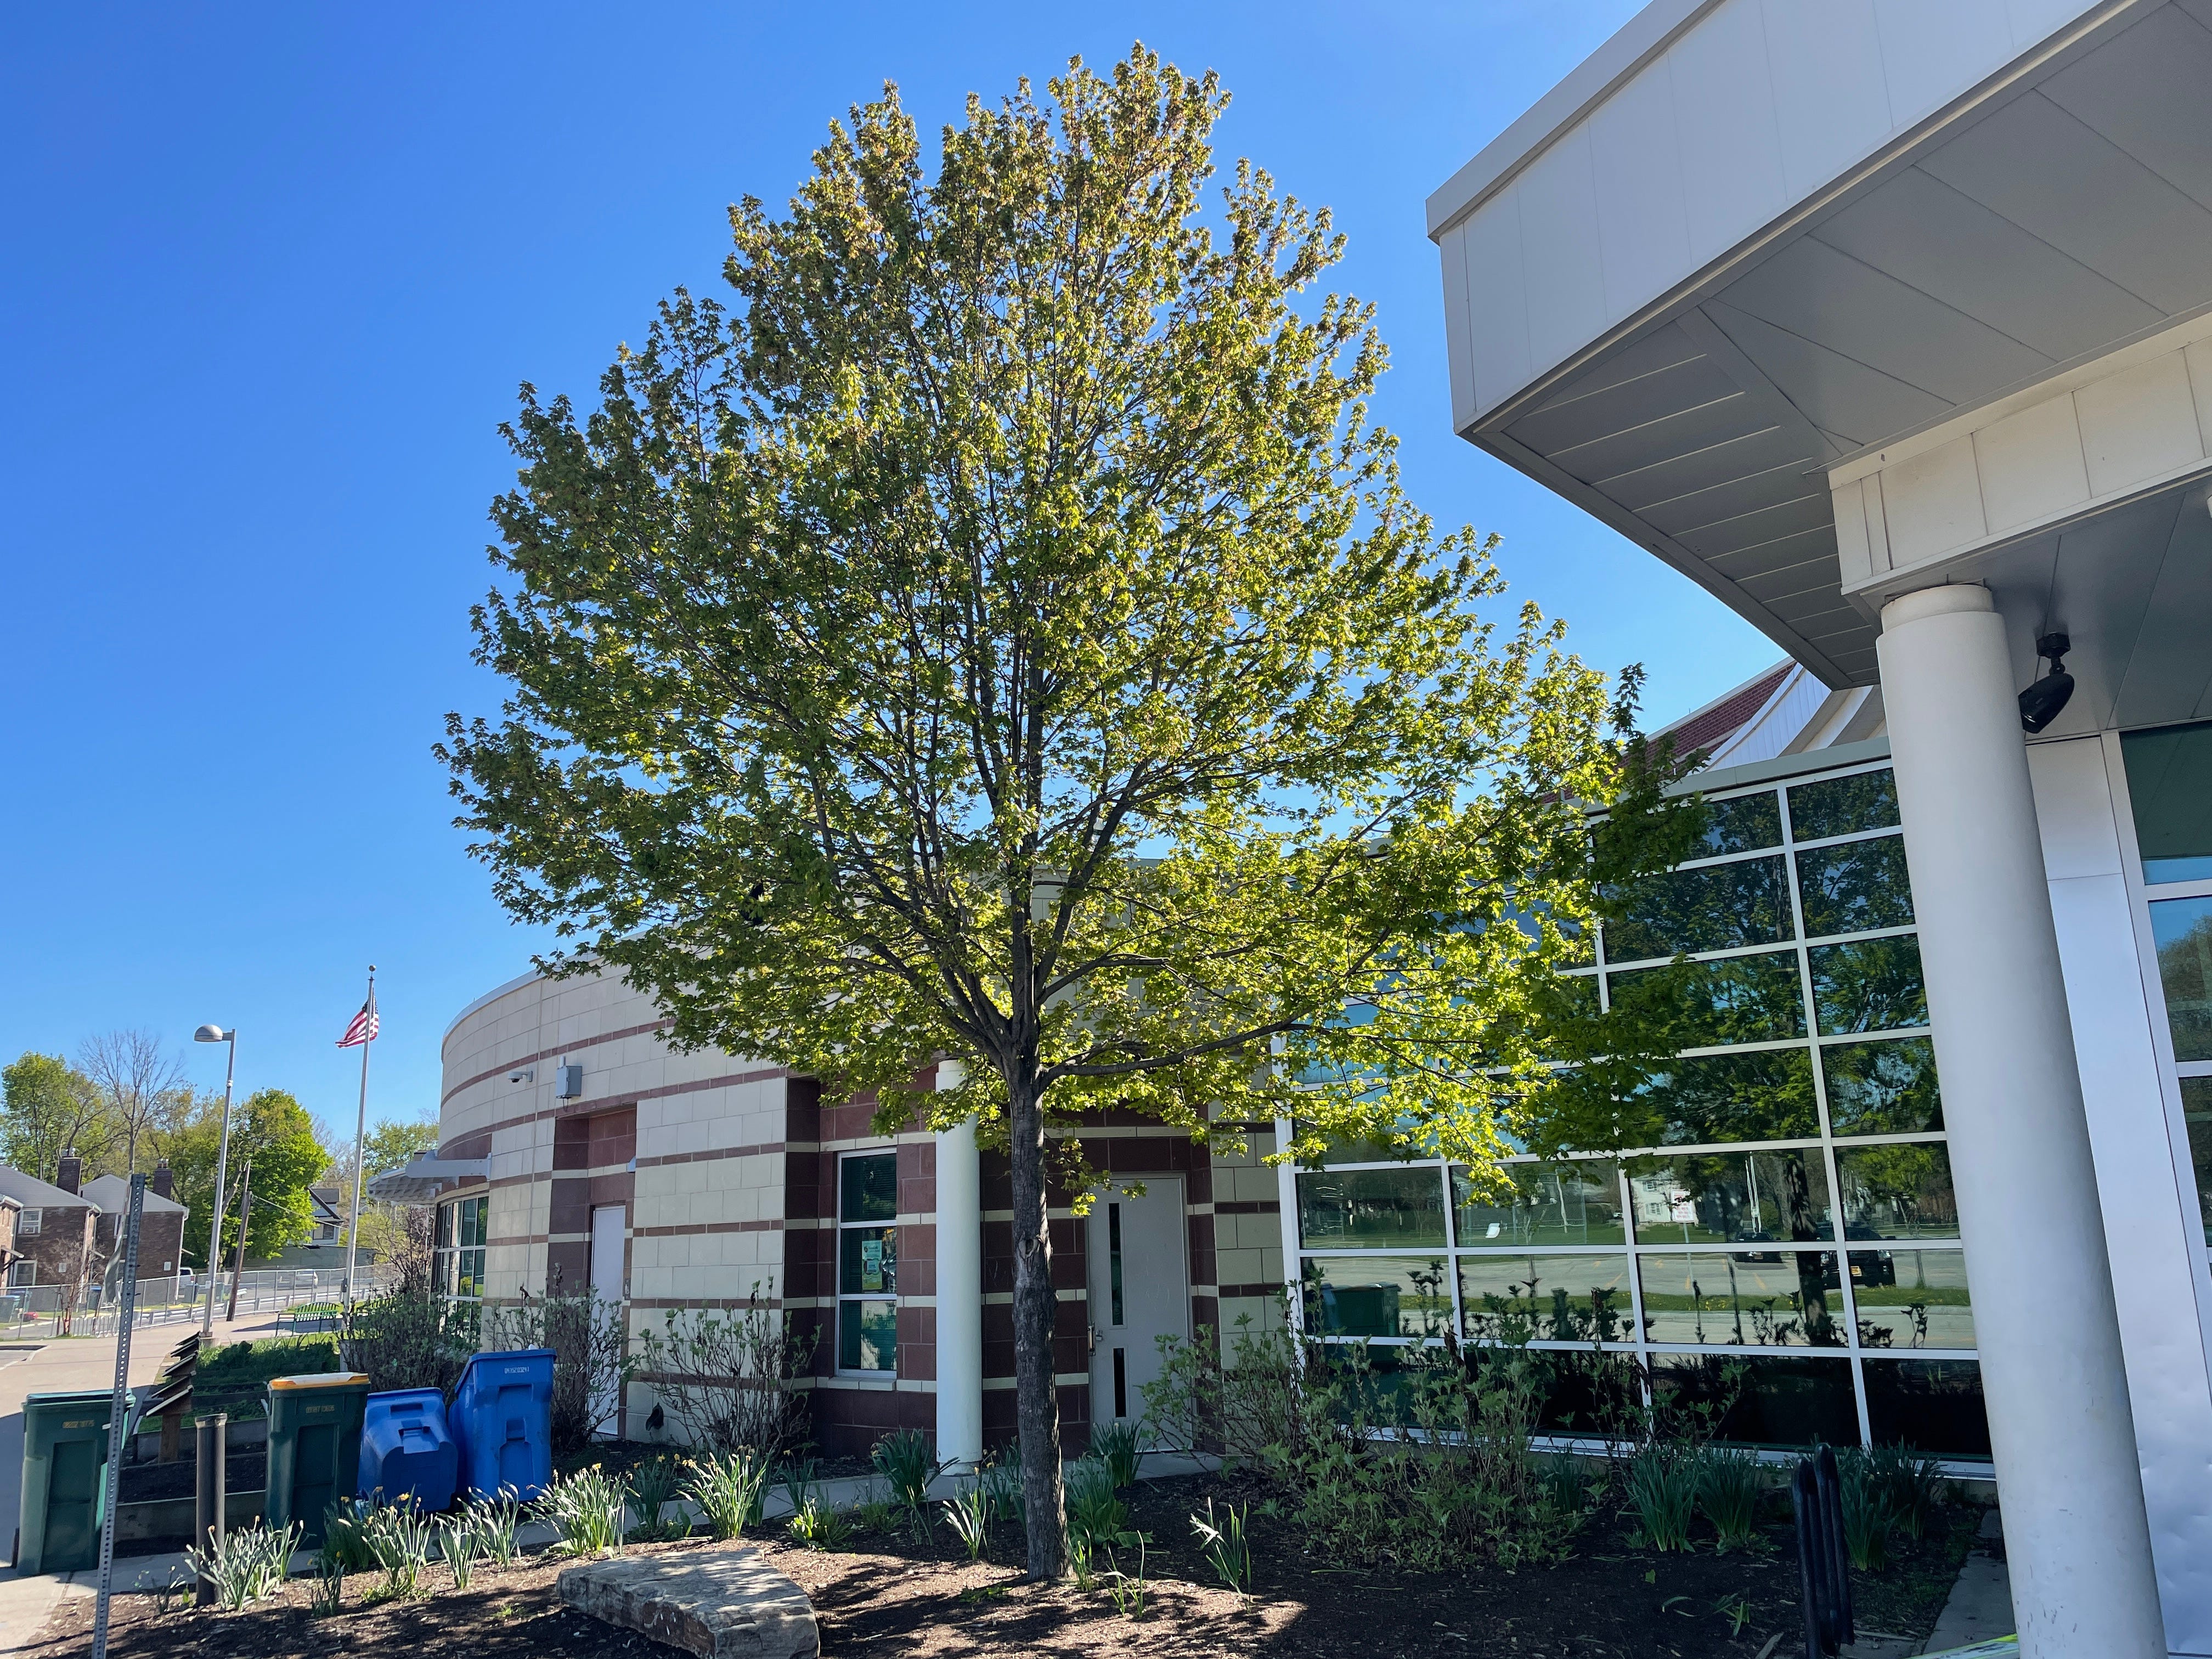 Tree Stories: Ryan branch library. "It’s perfectly proportioned – like when a kid draws a tree, and the proportions, that’s what it looks like," Rocky said.